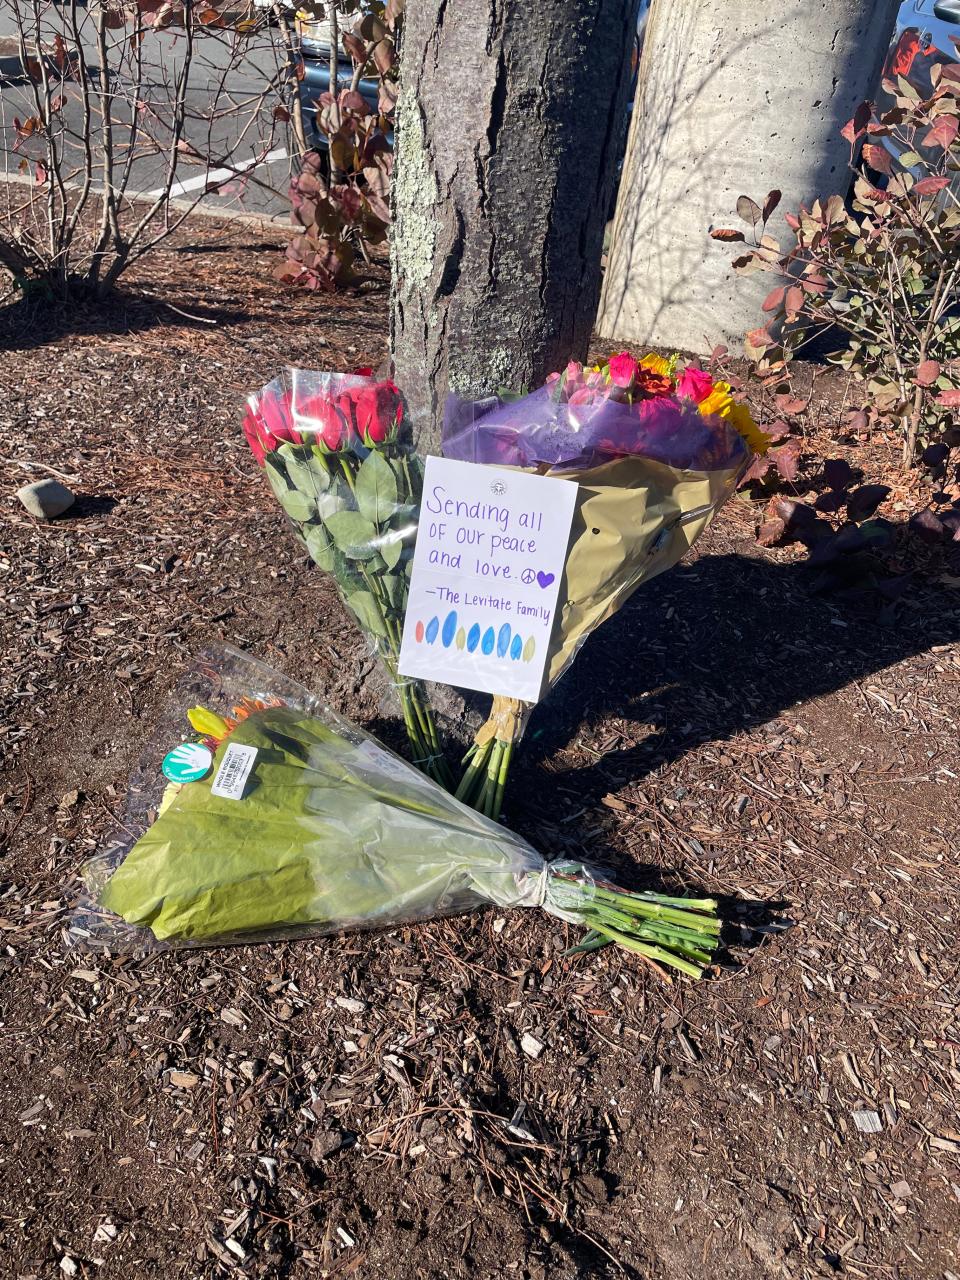 Flowers were left for the victims of a deadly crash at Derby Street Shops in Hingham Monday, Nov. 21, 2022.